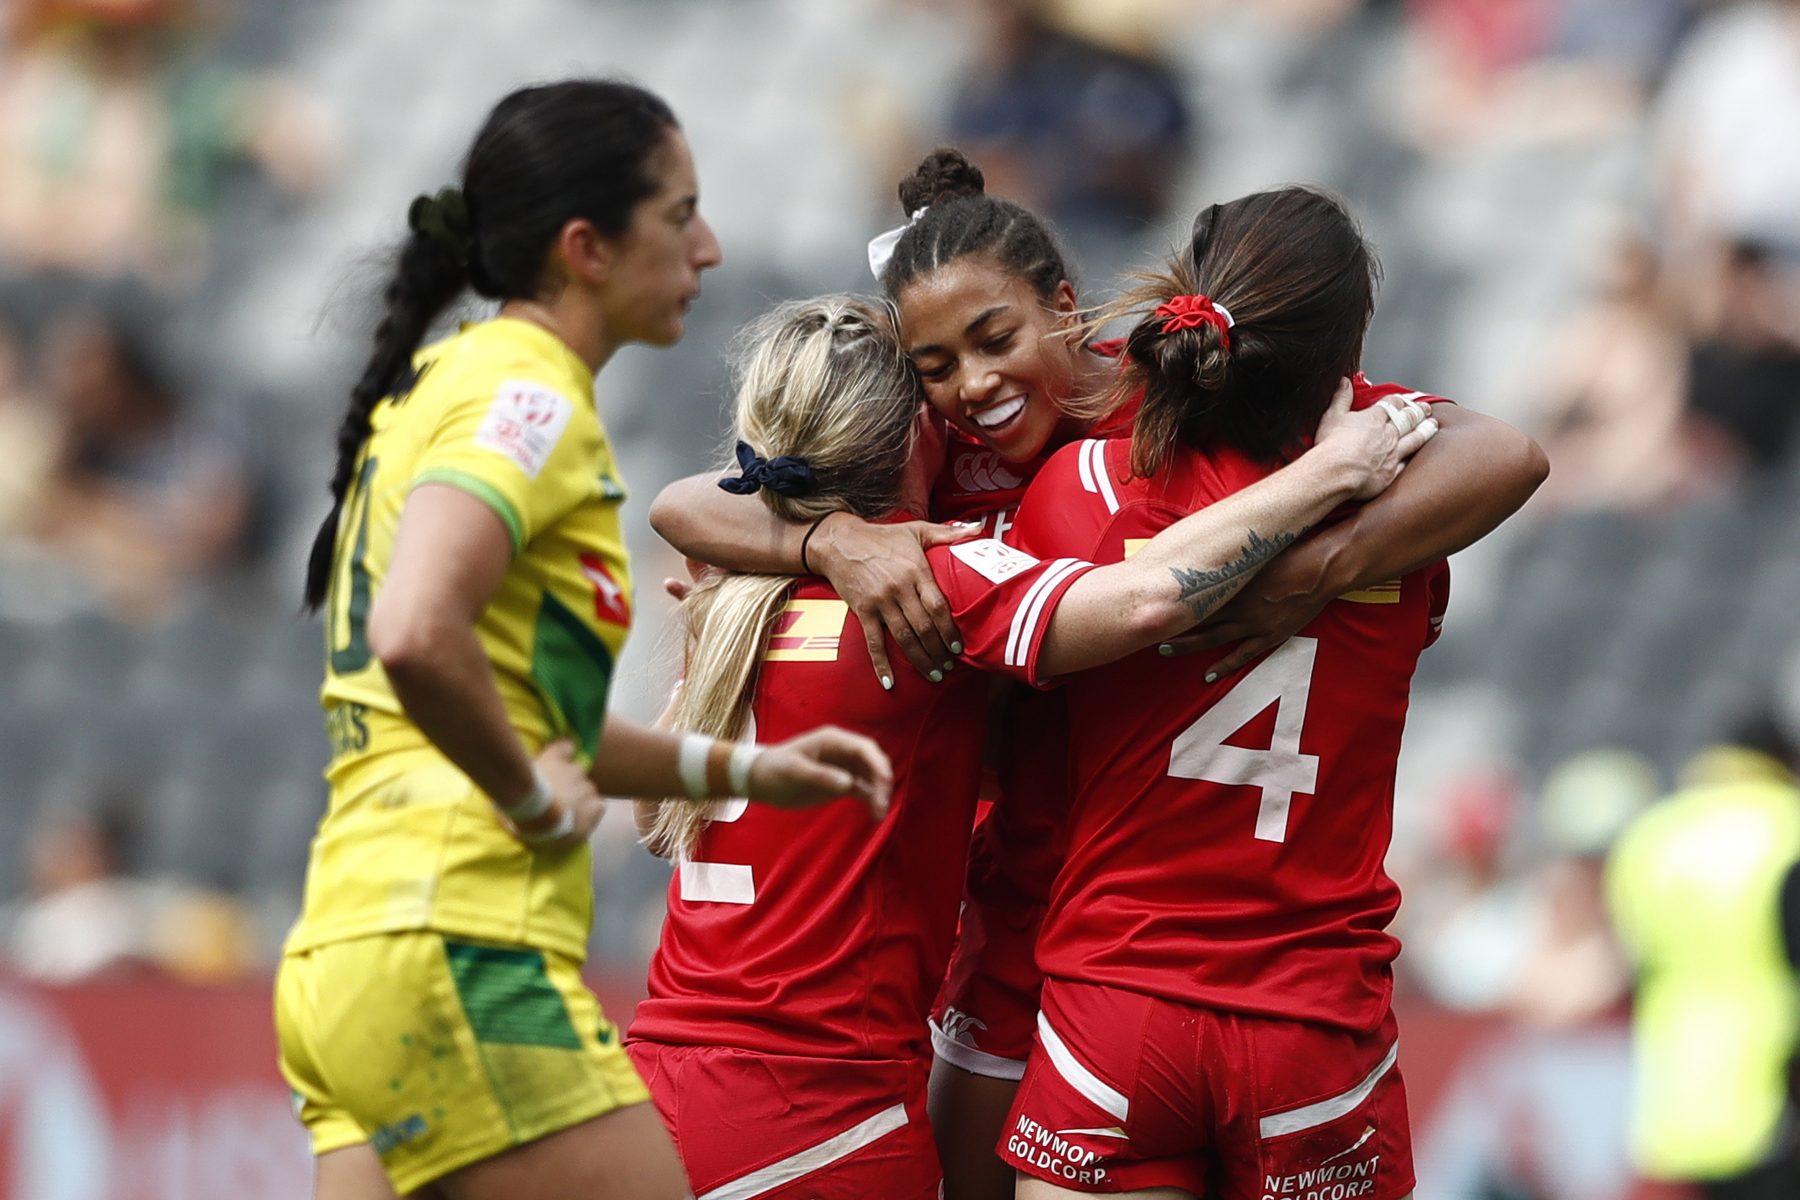 Canada players celebrate the Cup Semi Final win over Australia on day two of the HSBC Sydney Sevens 2020 women's competition at Bankwest Stadium on 2 February, 2020 in Sydney, Australia. Photo credit: Mike Lee - KLC fotos for World Rugby